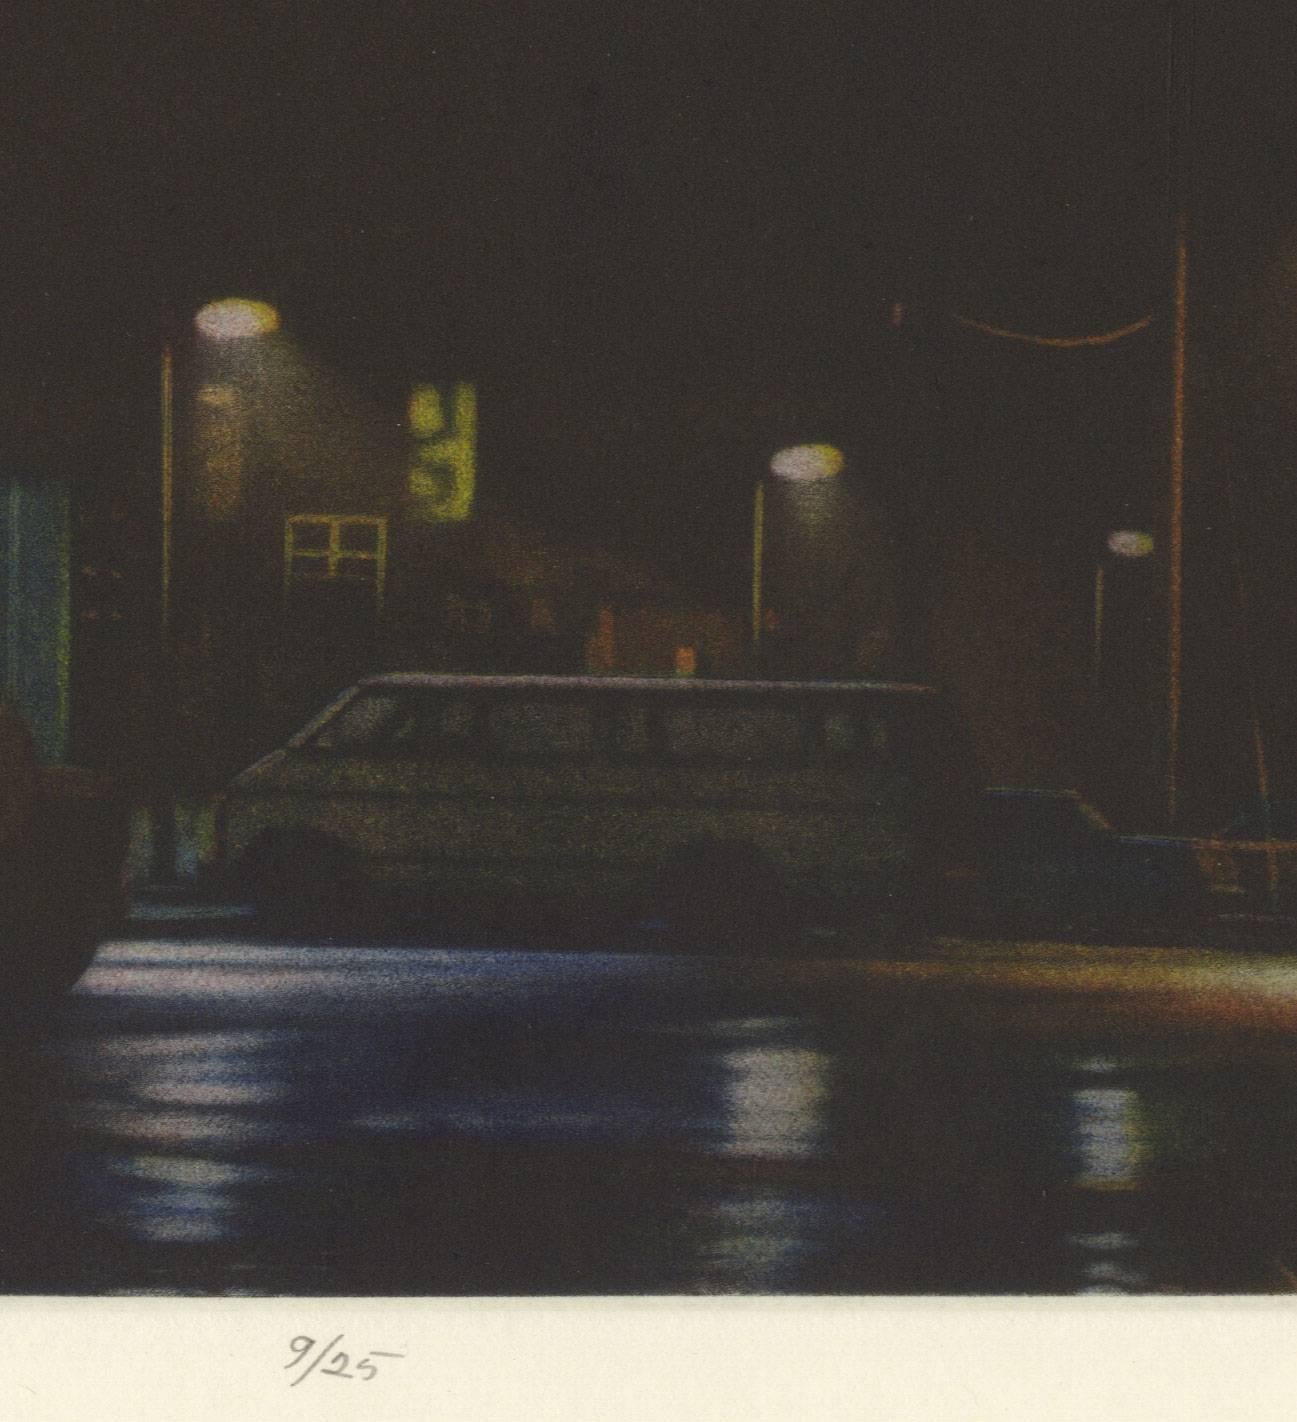 No  Outlet (night scene with parked vans in suburban setting on dead end) - Contemporary Print by Peter Jogo